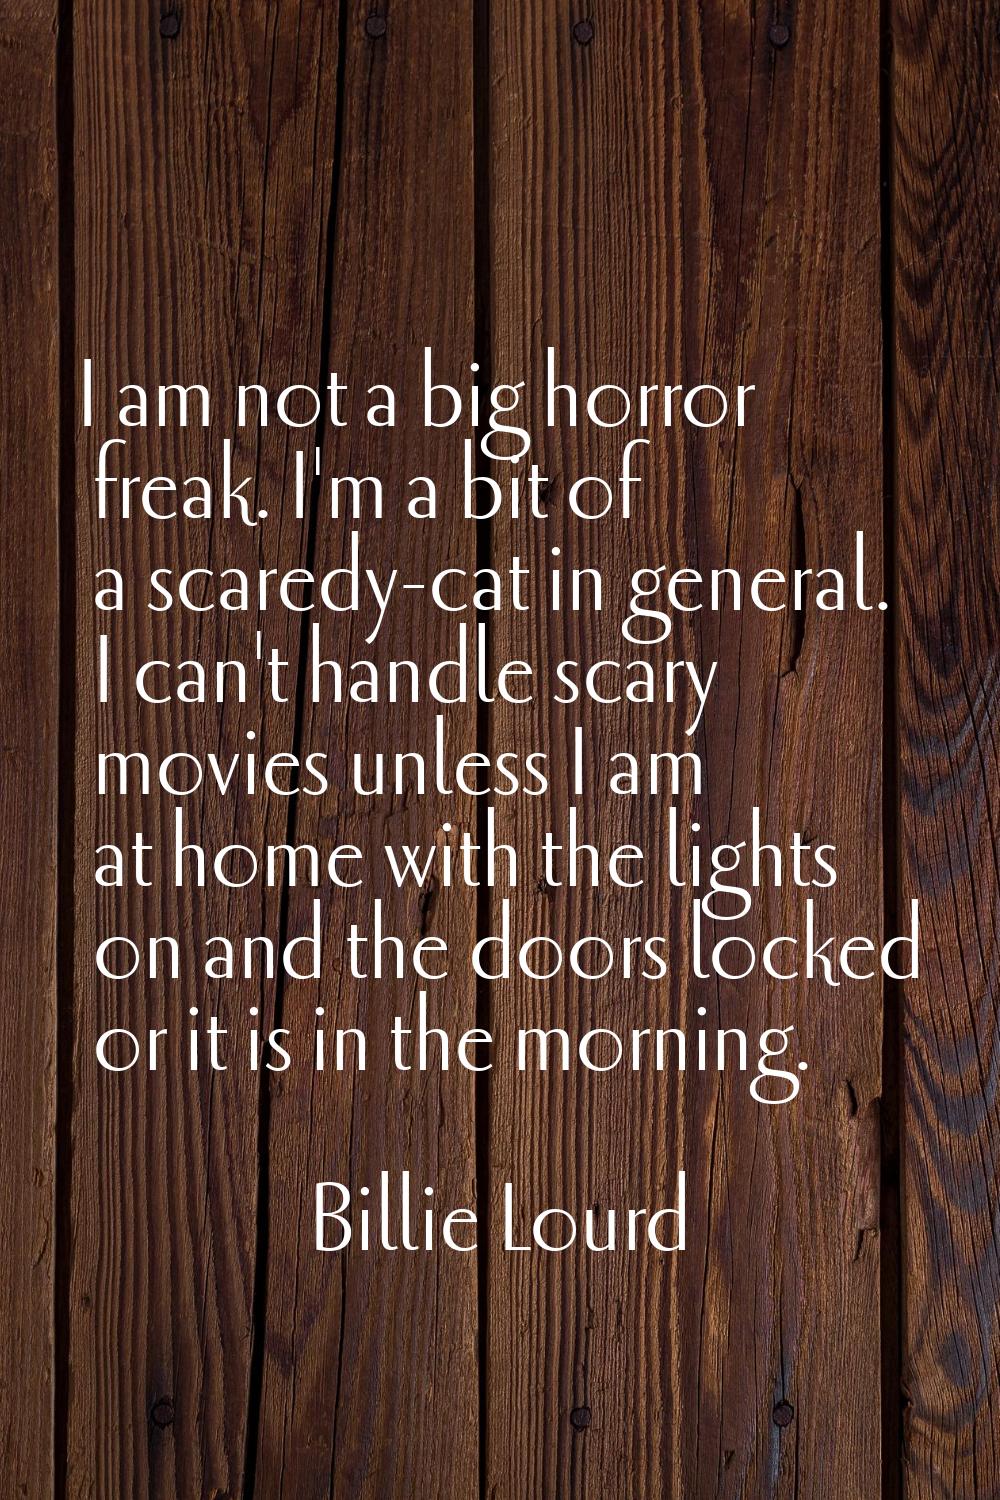 I am not a big horror freak. I'm a bit of a scaredy-cat in general. I can't handle scary movies unl